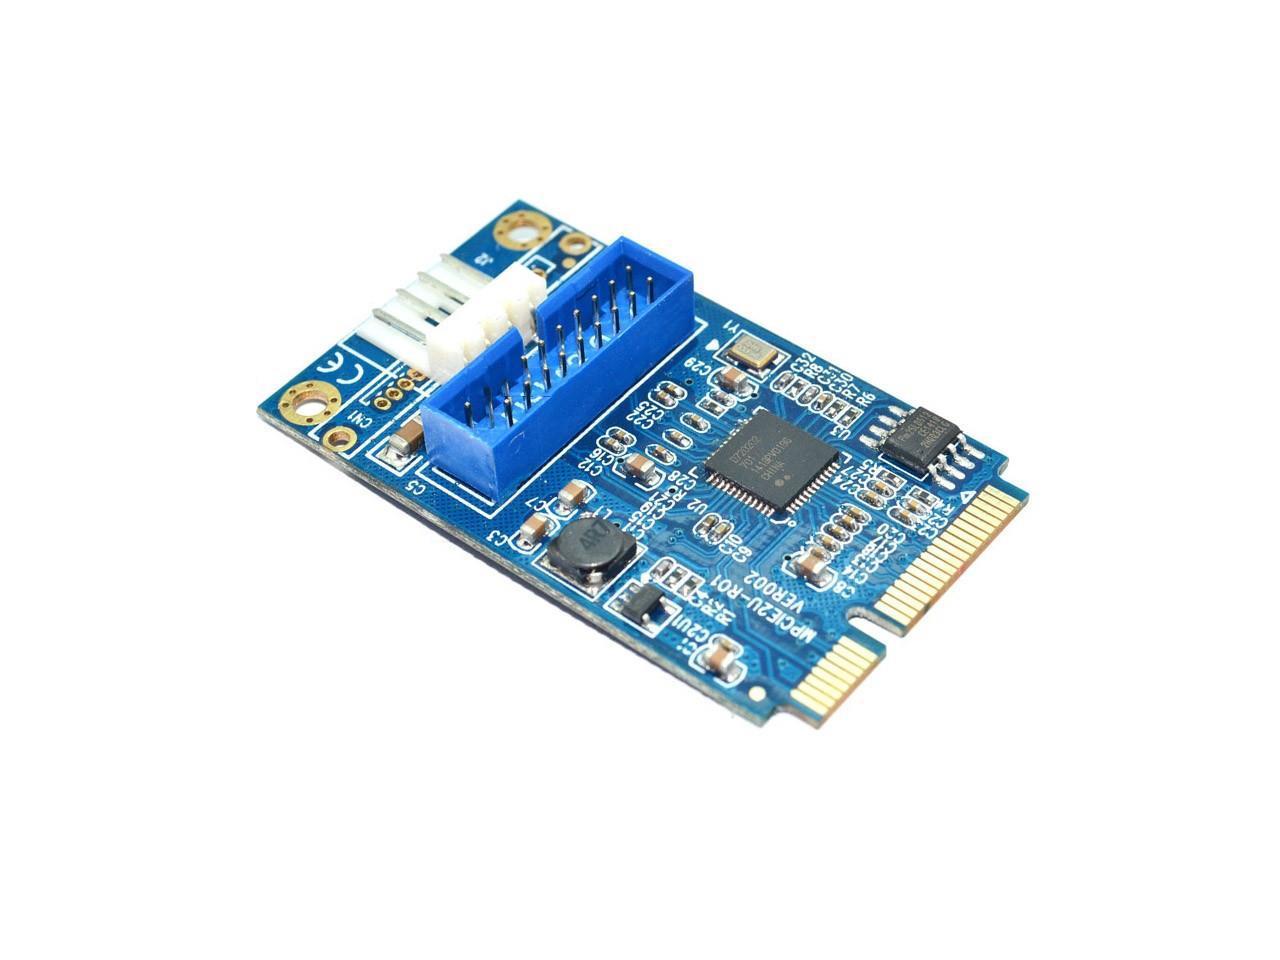 Grborn MINI PCI-E to USB3.0 Adapter Card Mini PCIE to 20Pin/19Pin Expansion Card